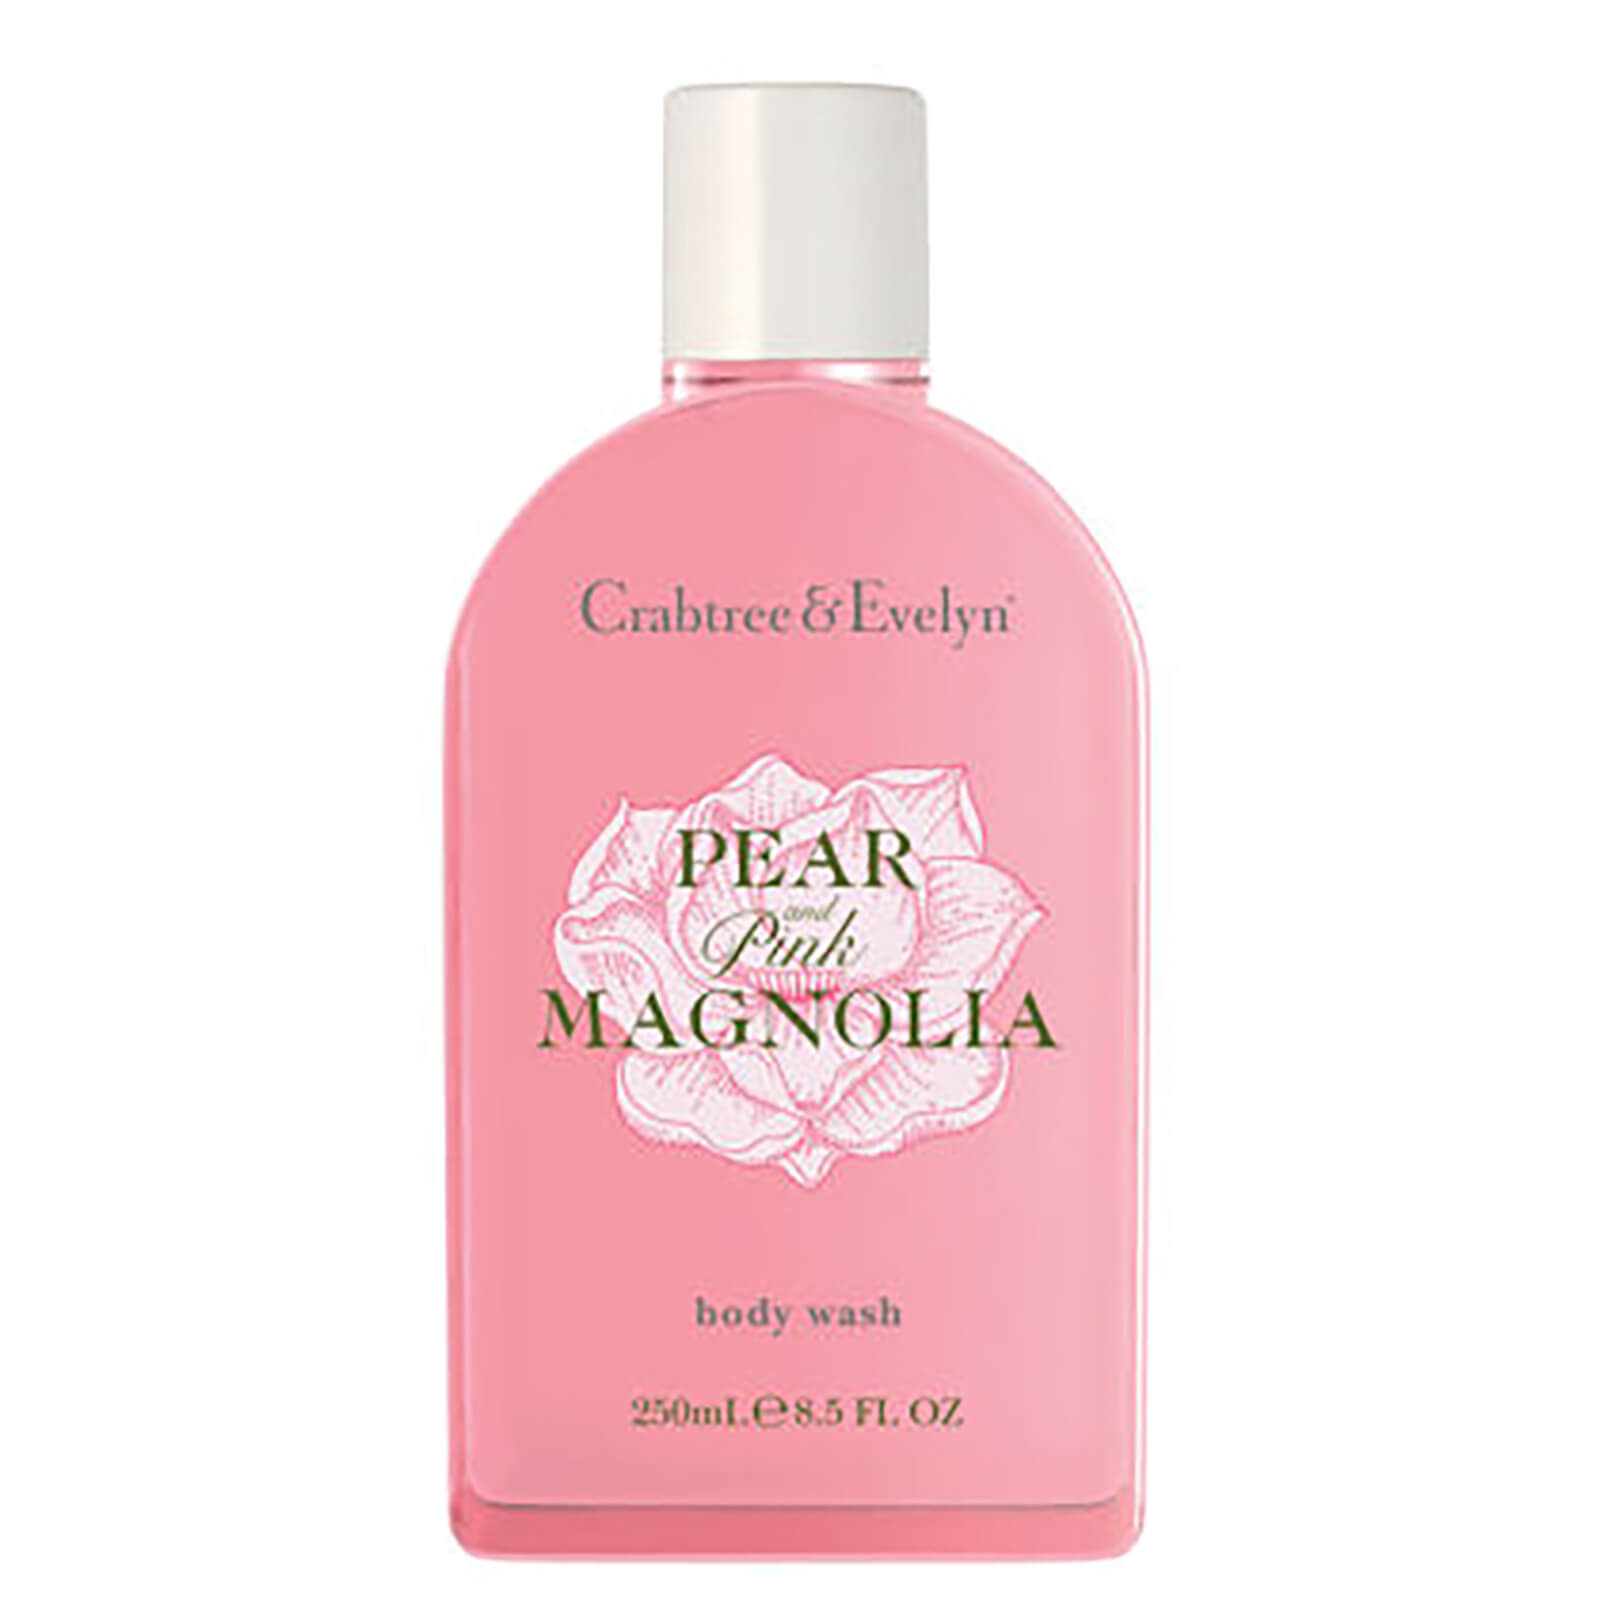 Crabtree & Evelyn Pear and Pink Magnolia Bath and Shower Gel (250 ml)